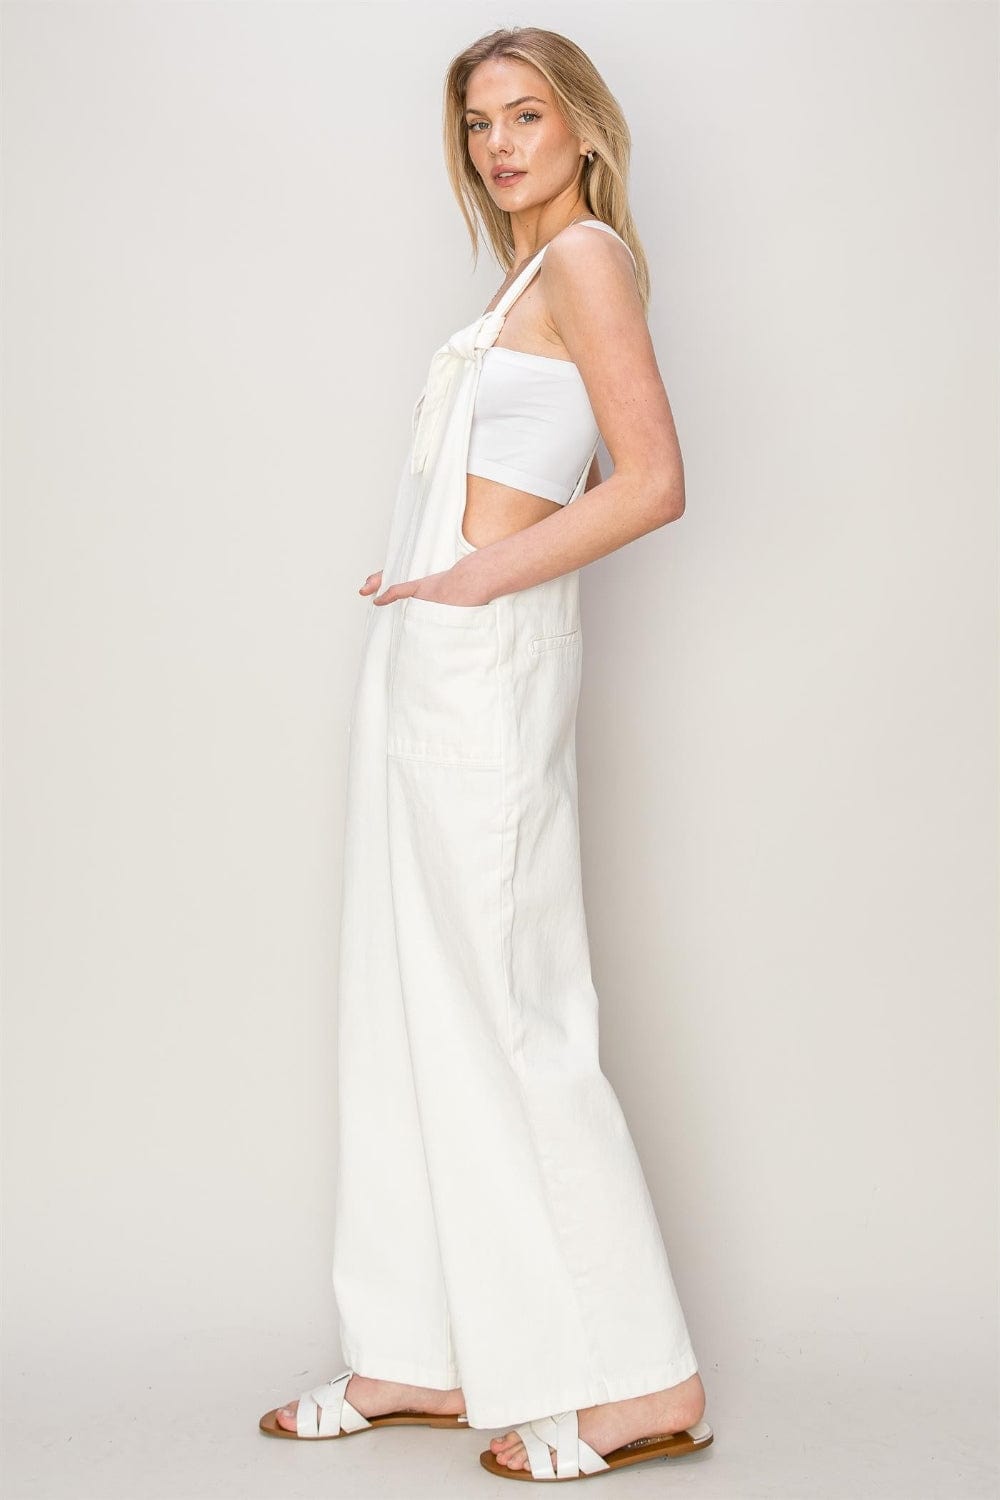 The802Gypsy rompers and jumpsuits Off White / S ❤️GYPSY-HYFVE-Women's Washed Twill White Summer Romper Overalls